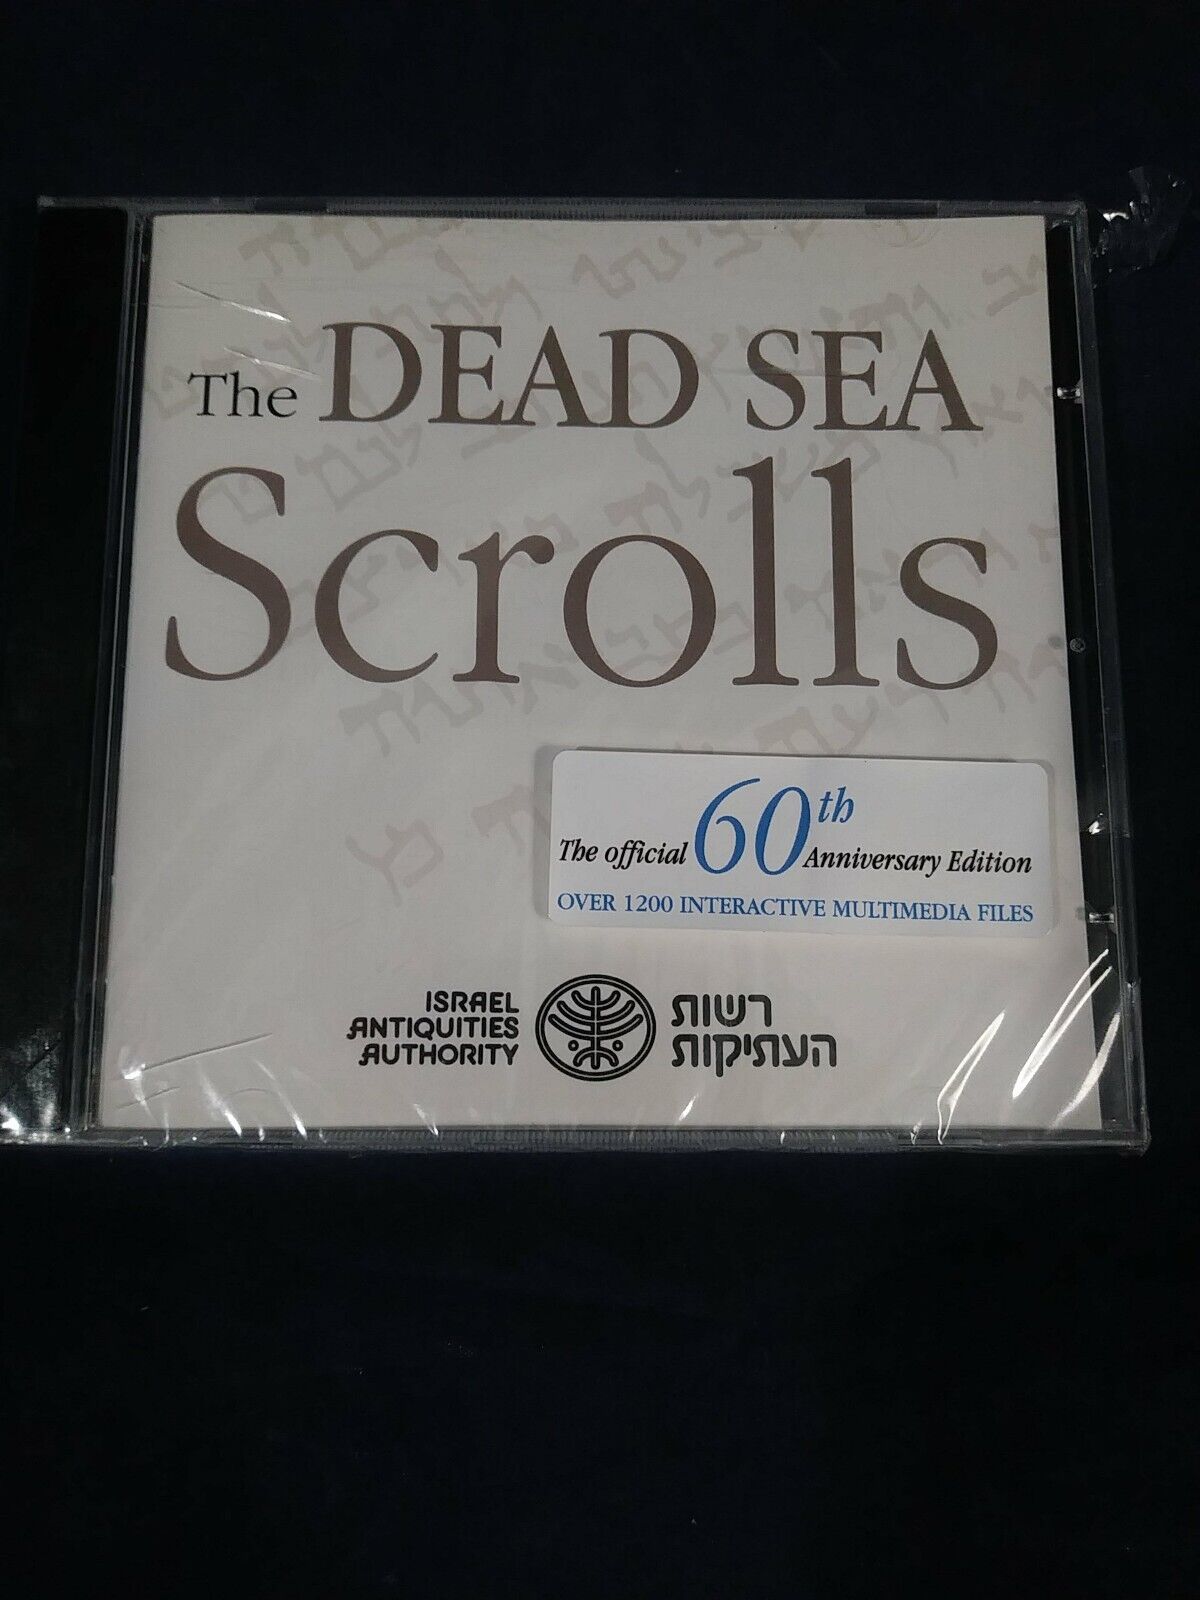 The Dead Sea Scrolls Over 1200 Interactive Media Files PC CD-ROM (Sealed)